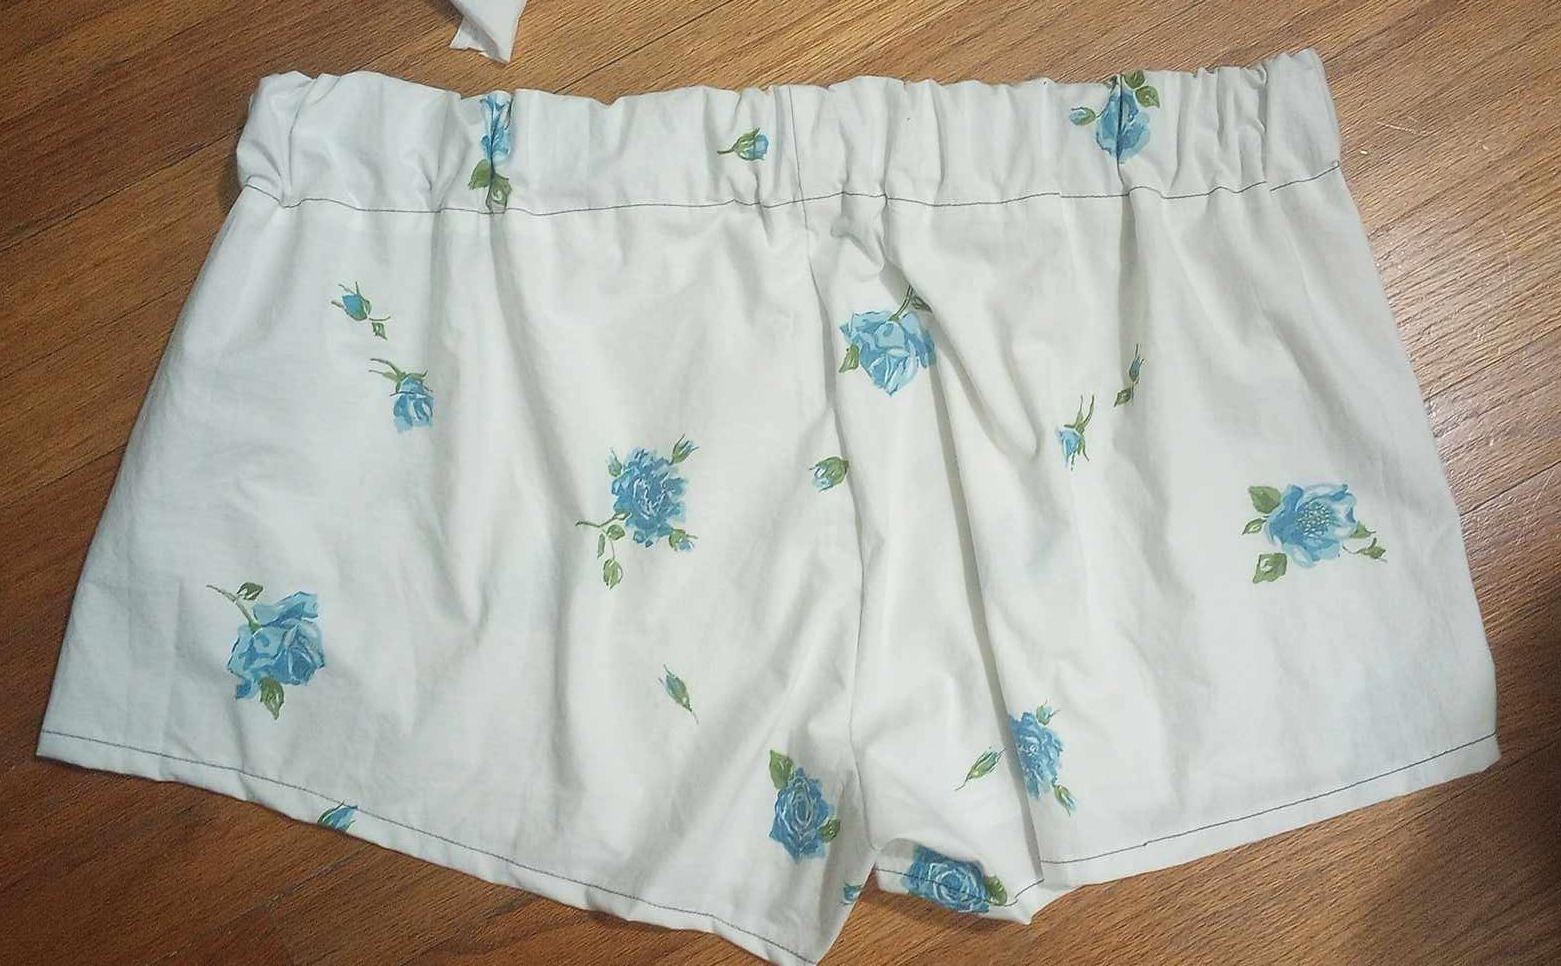 white shorts with blue flowers